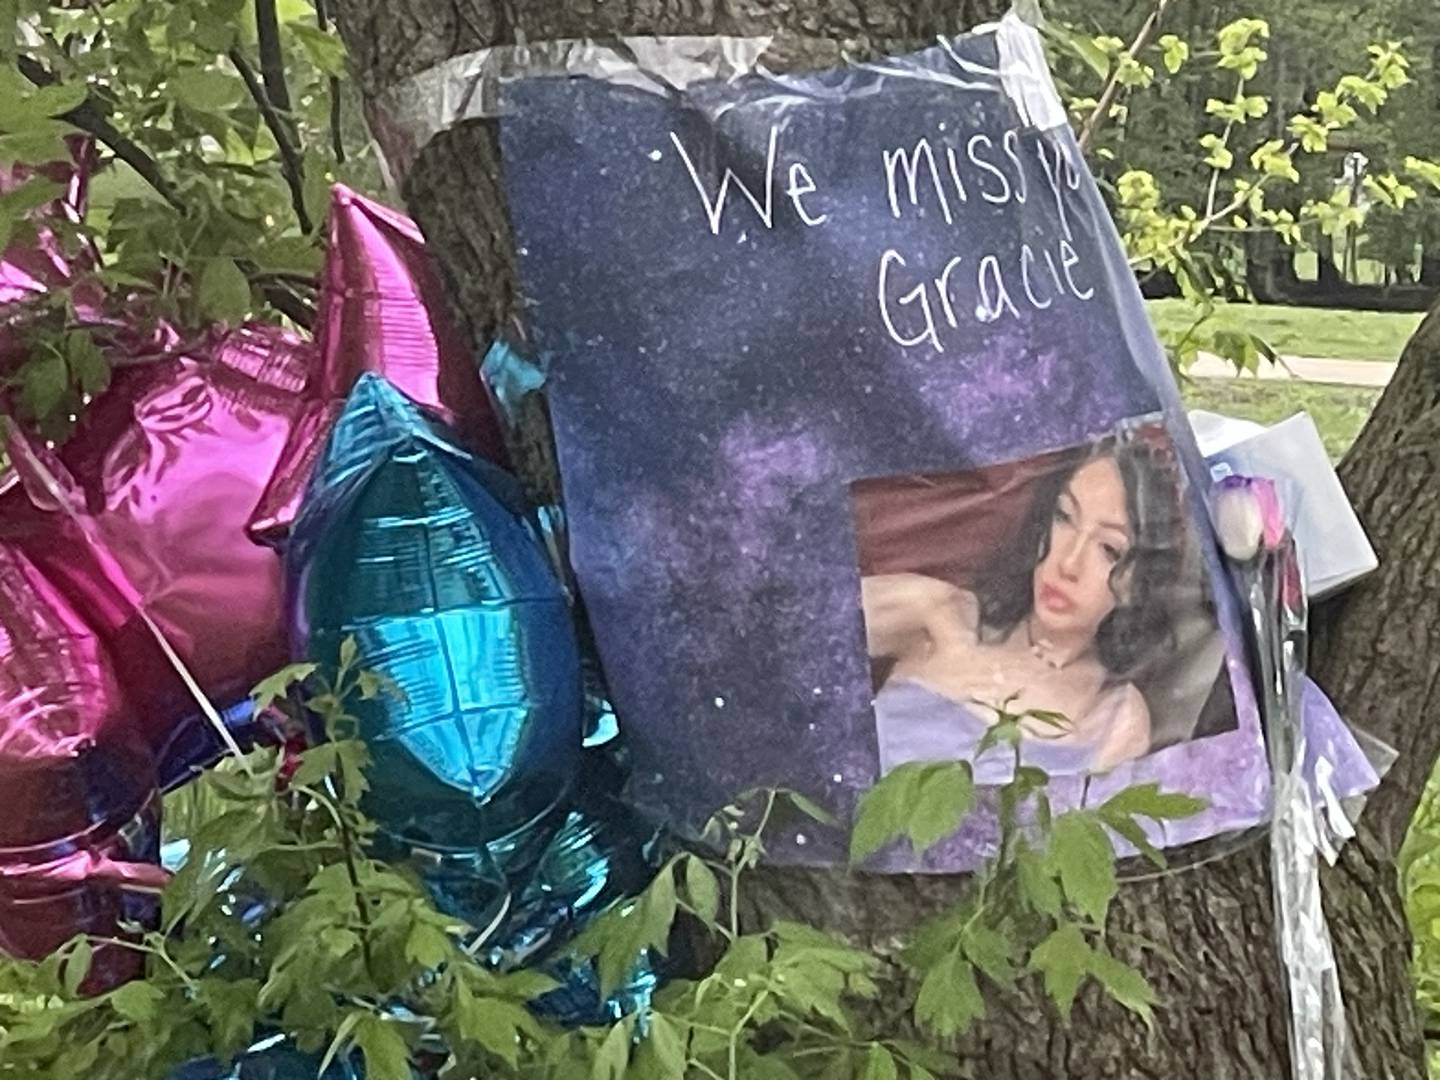 Some of Gracie Sasso-Cleveland's (shown in the picture) friends gathered Monday, May 8, 2023 in the backyard of a home in the 500 block of College Avenue in DeKalb where the girl was allegedly murdered May 4, 2023. Timothy Doll, 29, is charged with murder in the death of Sasso-Cleveland, 15, of DeKalb.